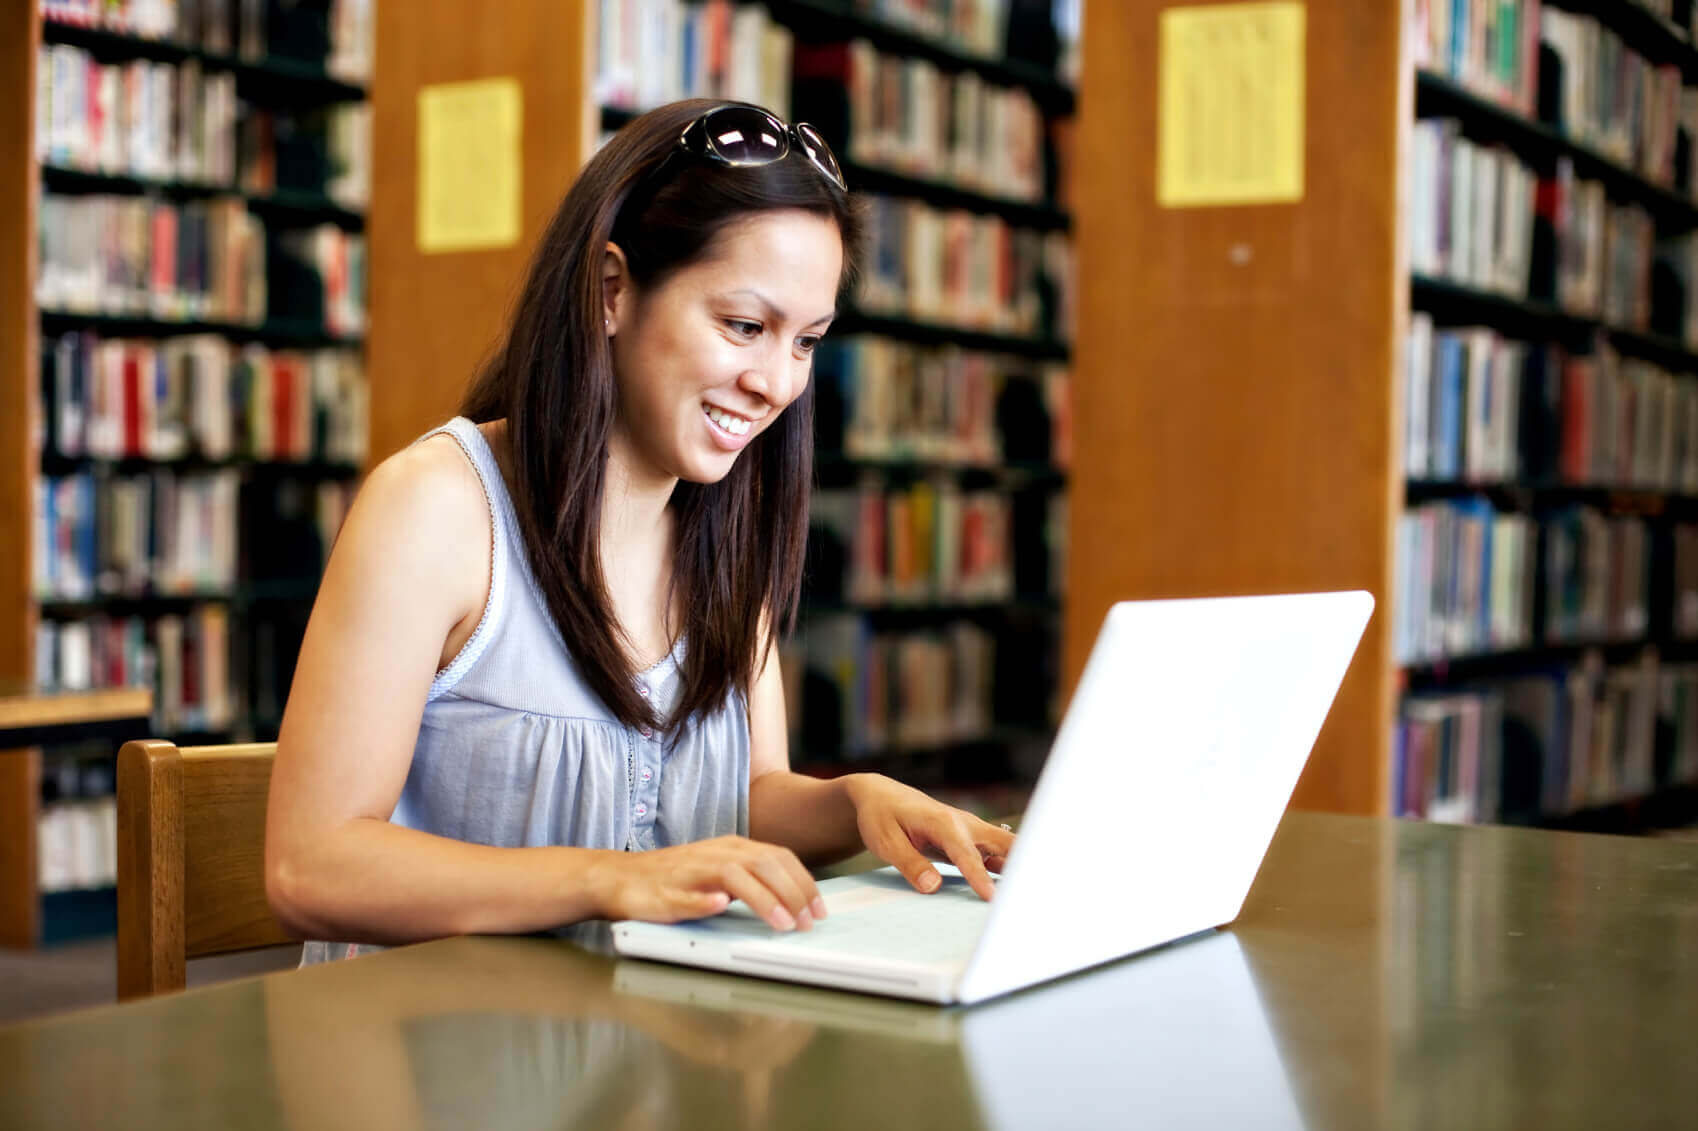 Woman smiling while using a laptop in a library